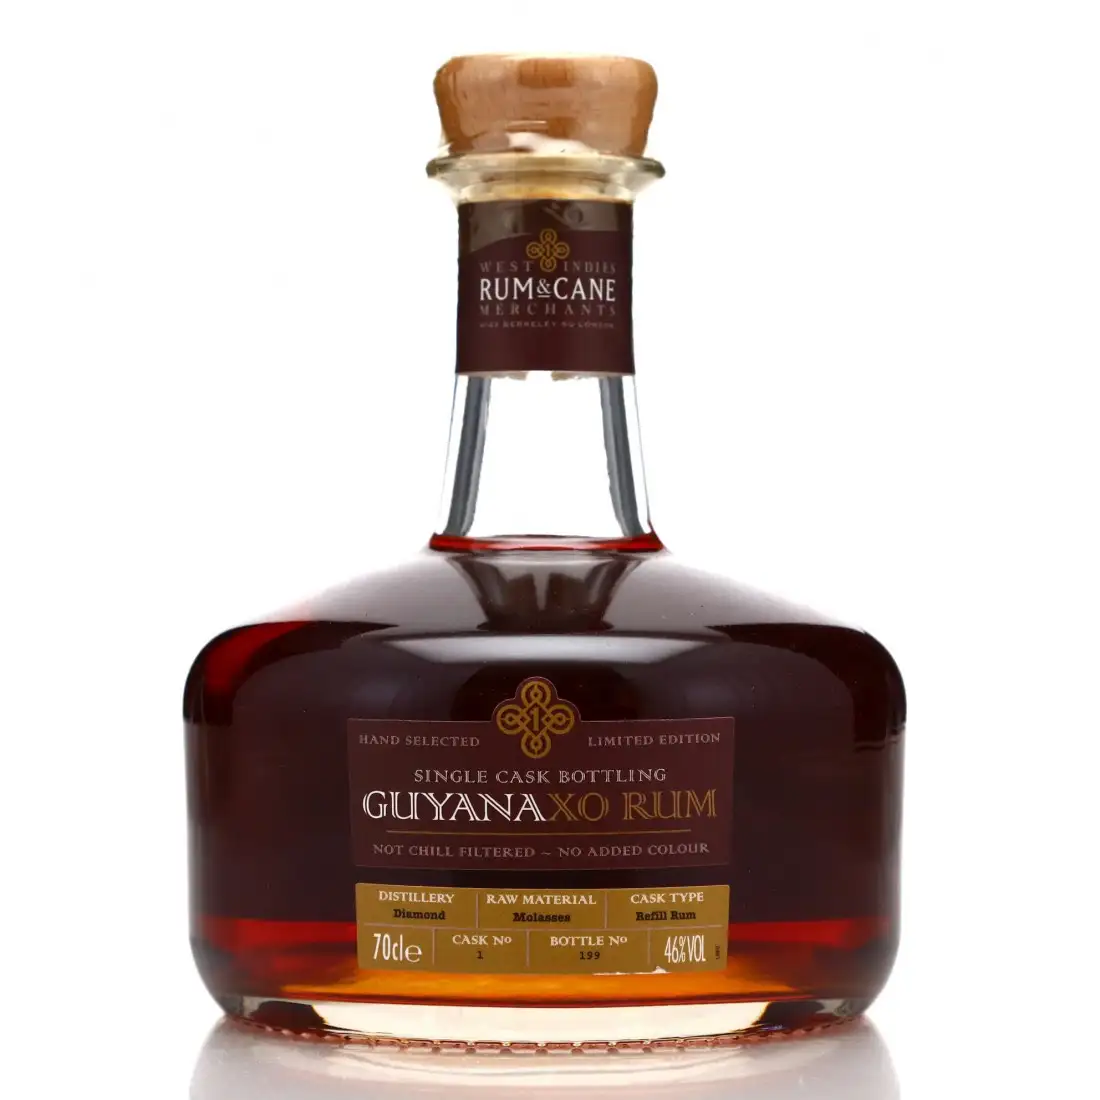 Image of the front of the bottle of the rum Rum & Cane Guyana XO